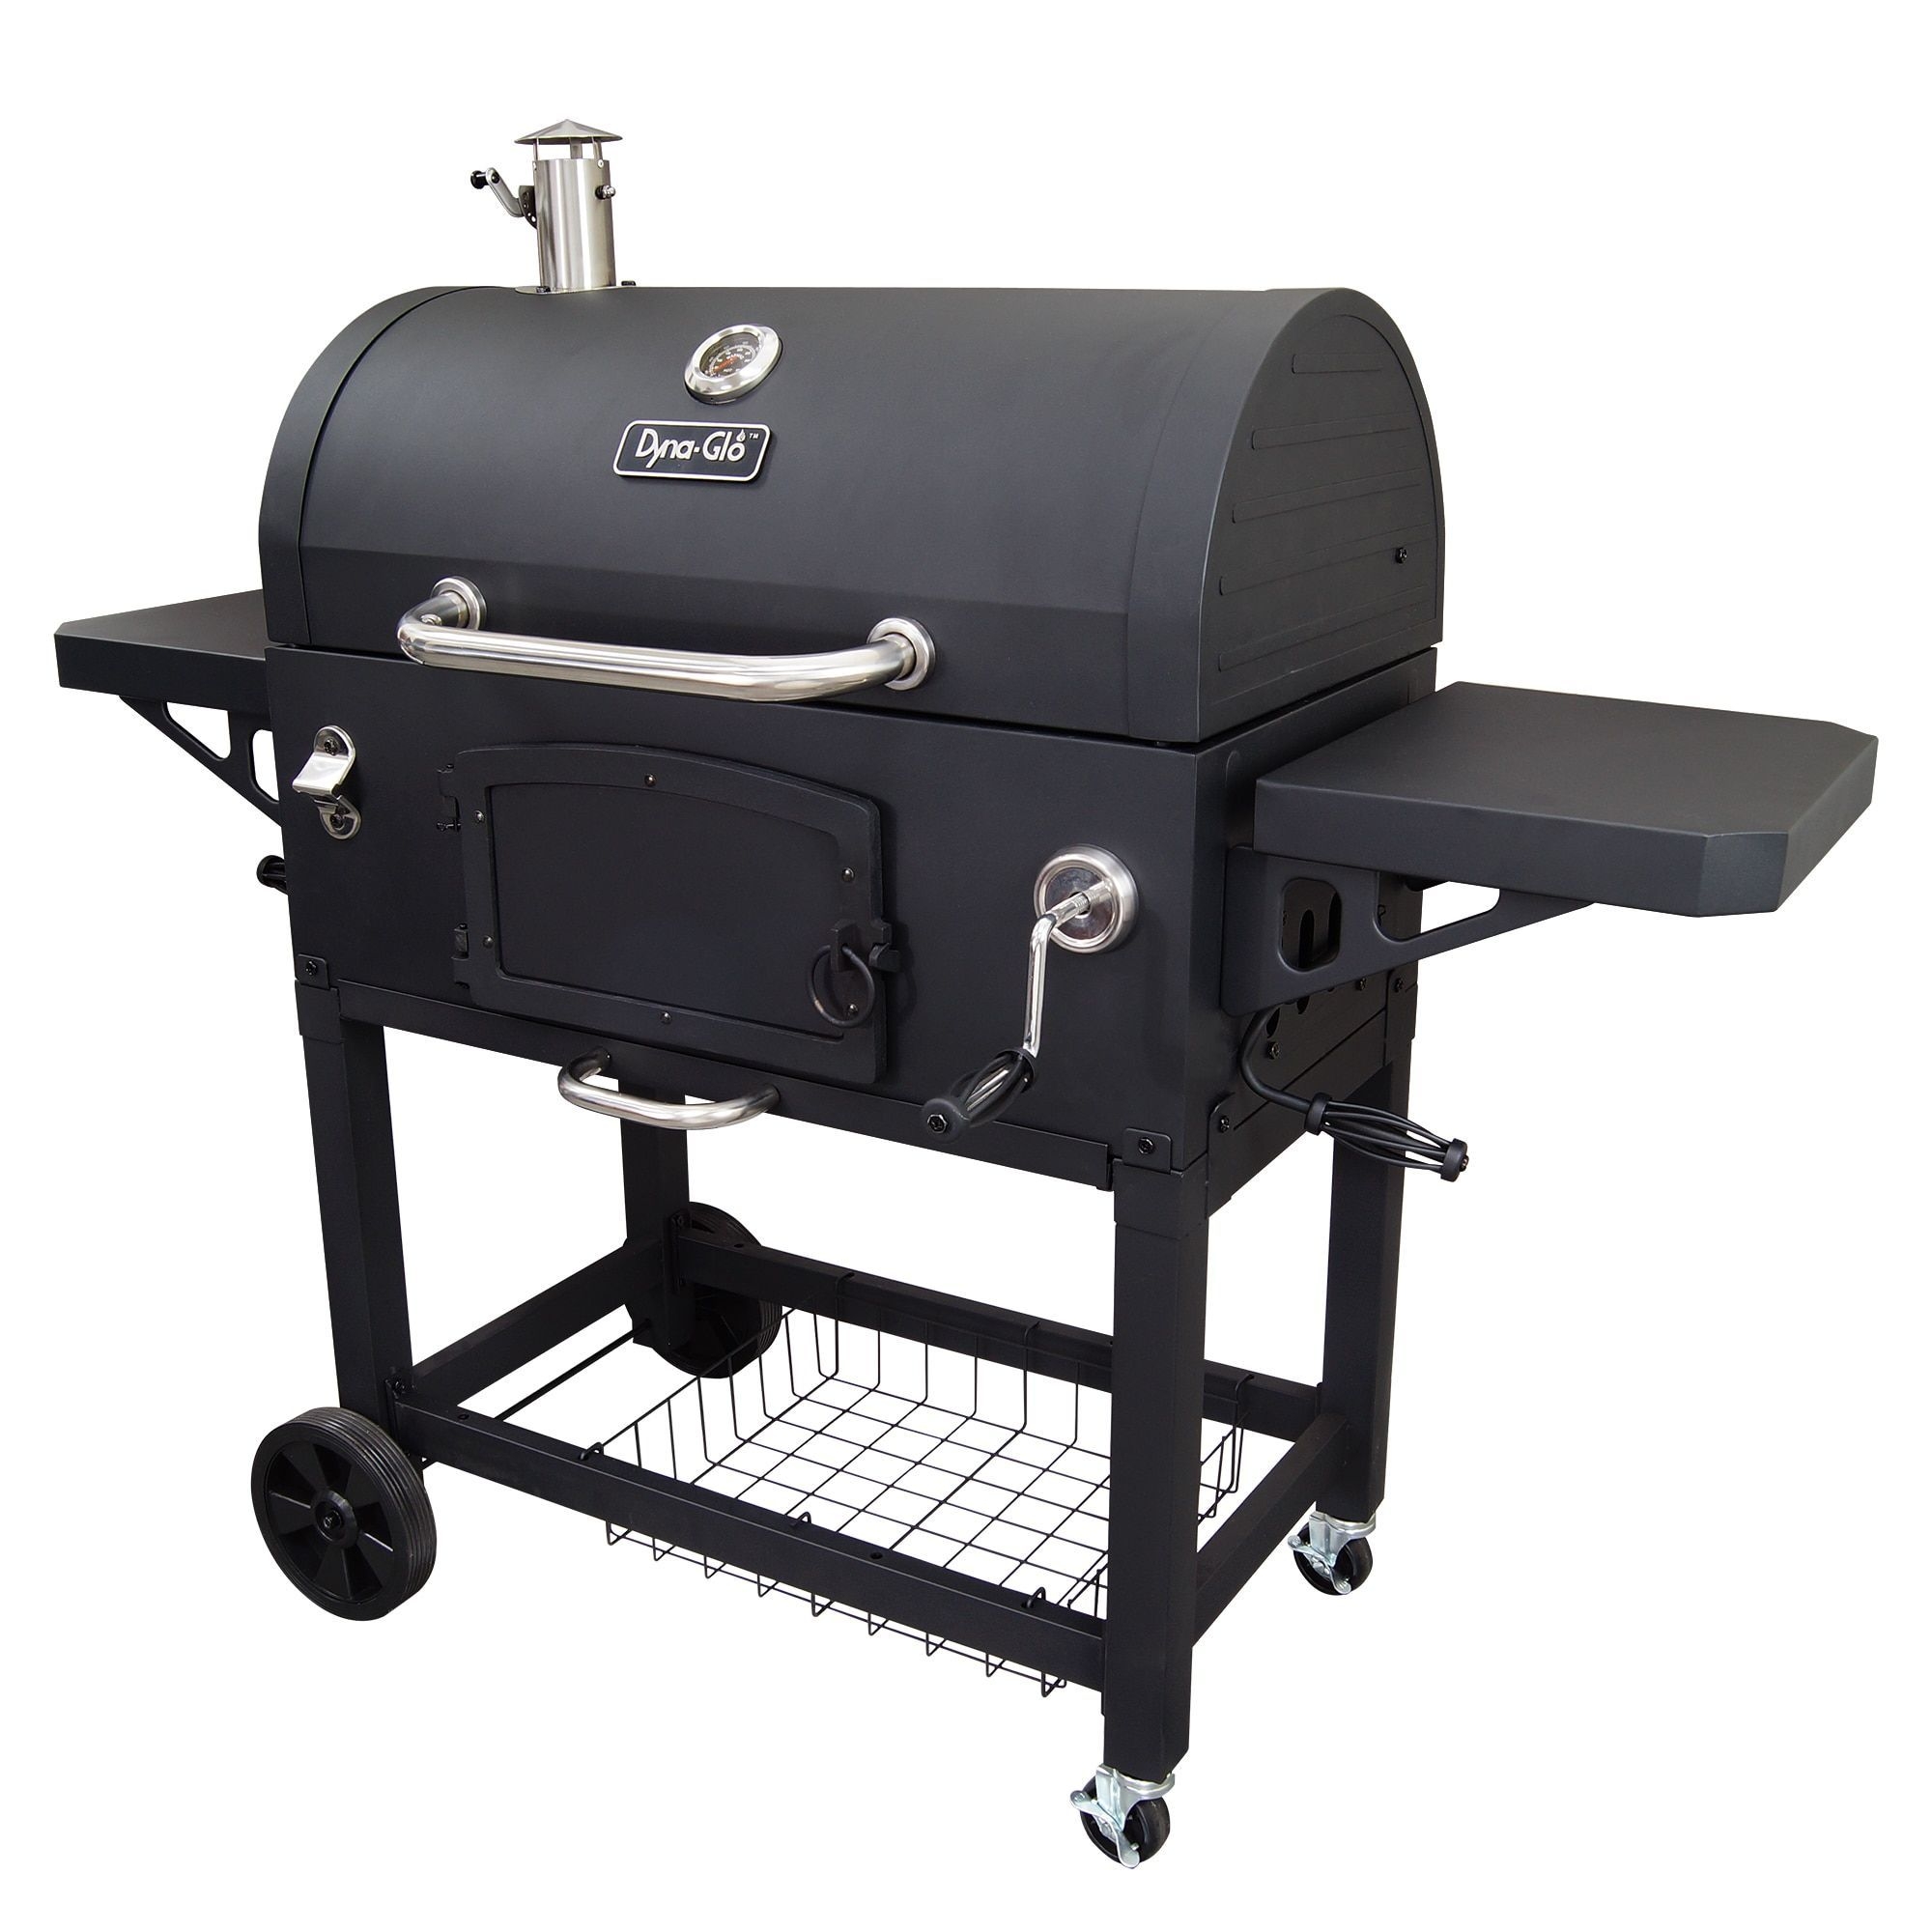 Dyna Glo Charcoal Grill With Adjustable Charcoal Tray And Cast Iron Cook Grate